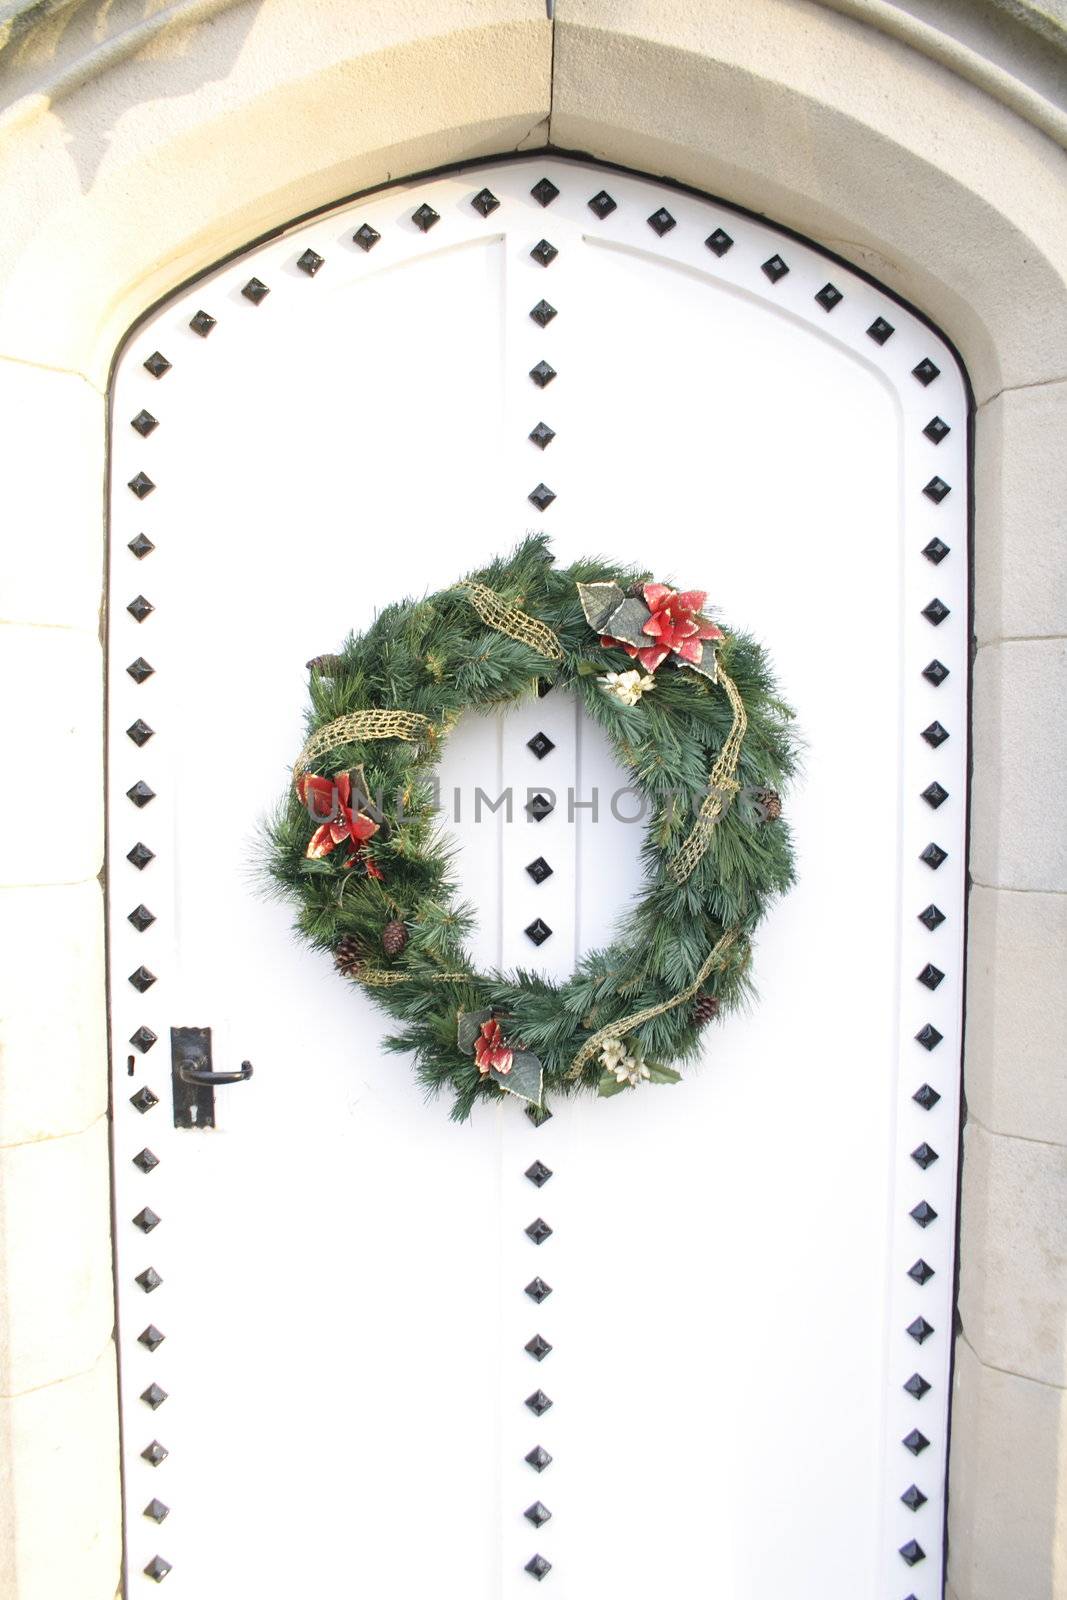 welcoming christmas at the door by leafy